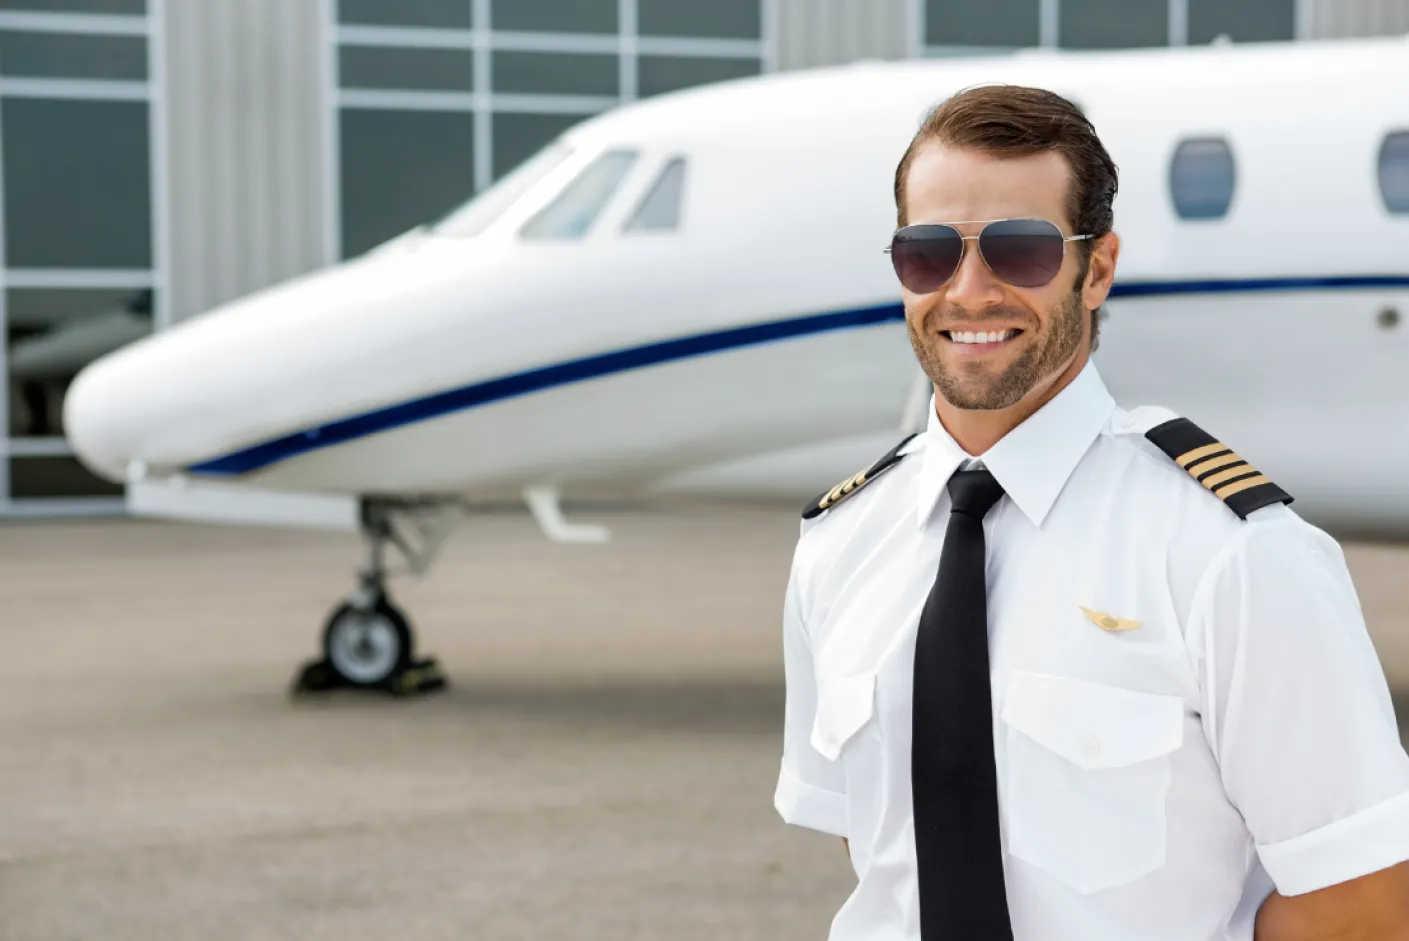 Commercial pilot license test for aeroplanes: Prepare for the official exam with our comprehensive study materials